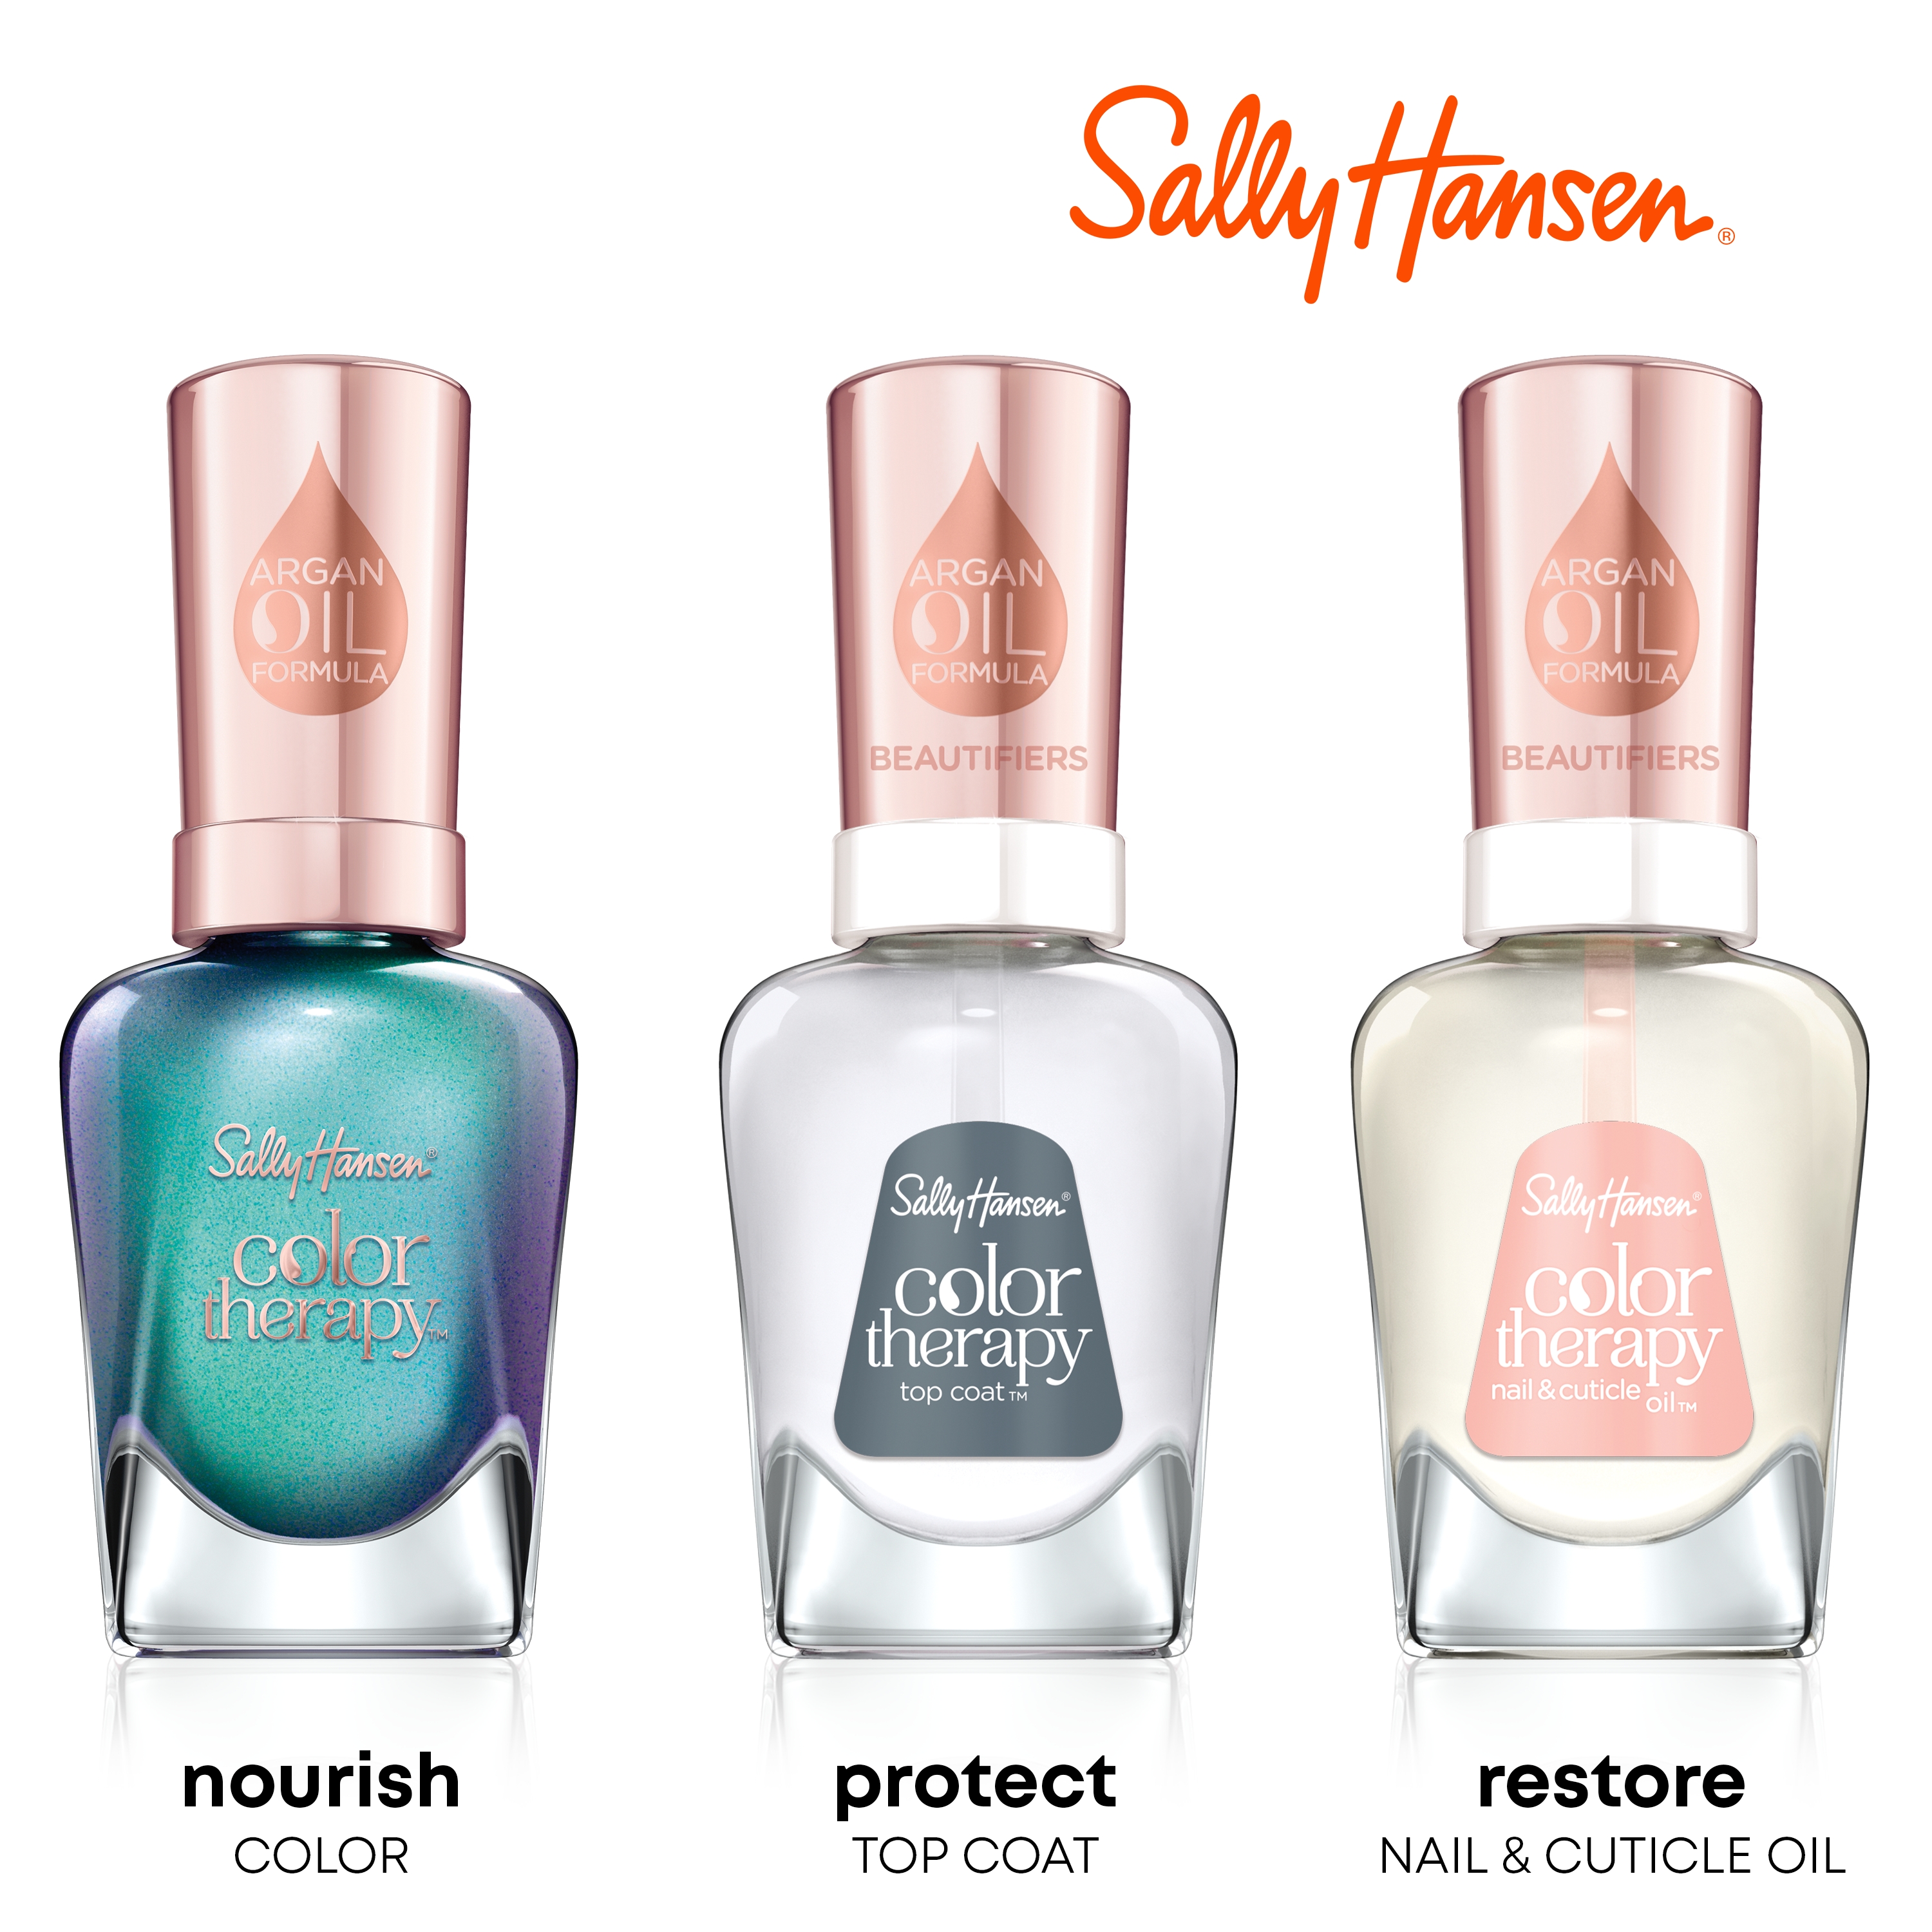 Sally Hansen Color Therapy Nail Color, Therapewter, 0.5 oz, Color Nail Polish, Nail Polish, Nail Polish Colors, Restorative, Argan Oil Formula, Instantly Moisturizes - image 5 of 13